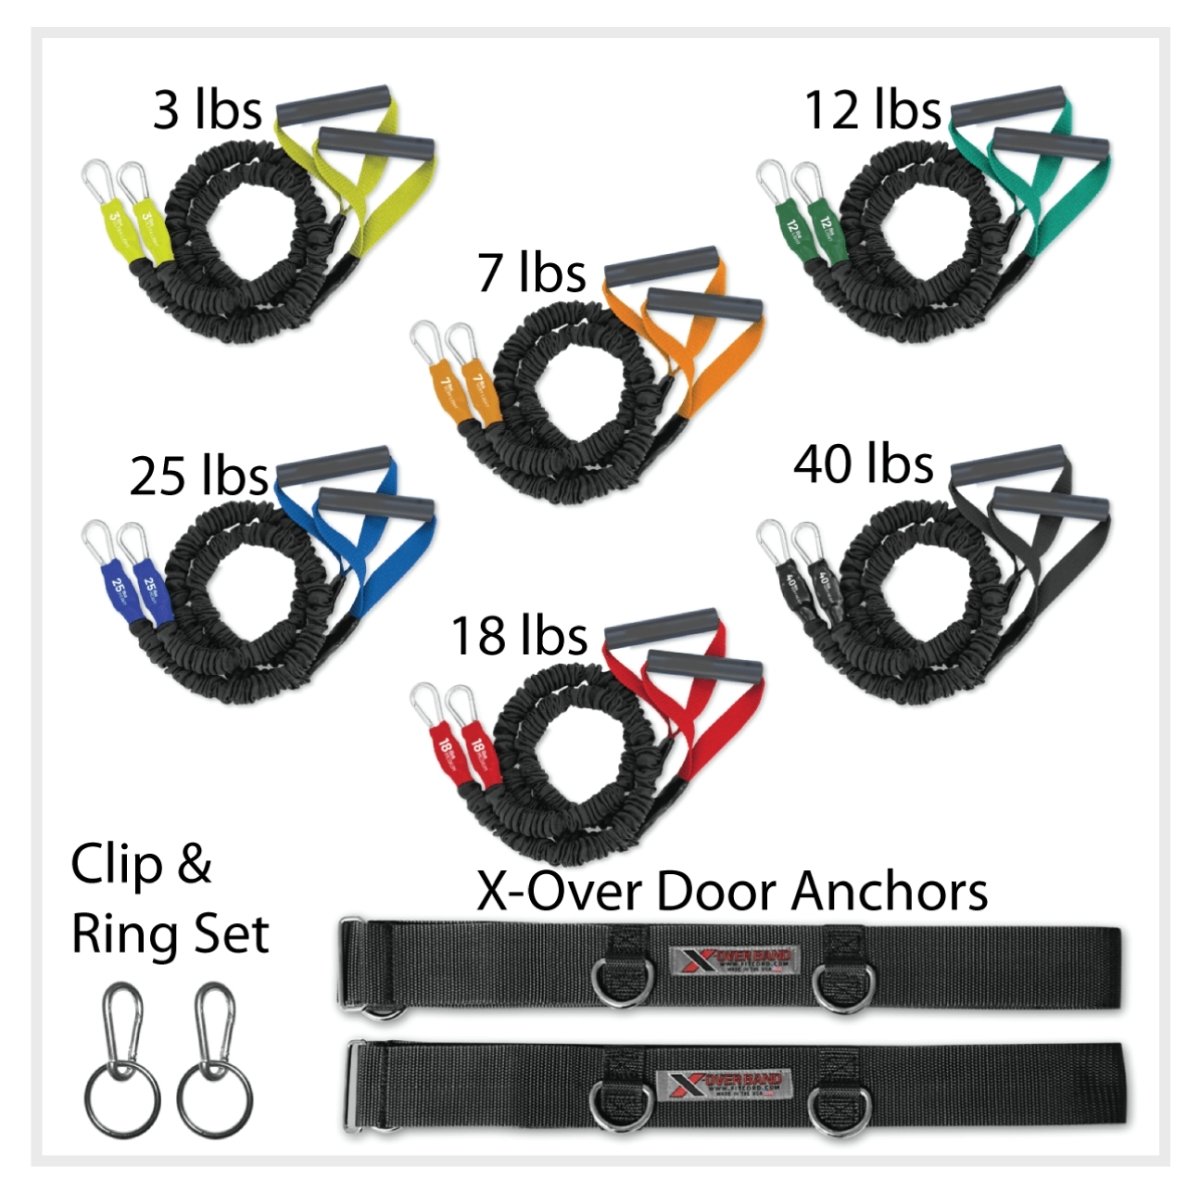 COMPLETE AT HOME GYM FOR SHOULDERS AND ARMS AND DOOR ANCHOR COMPARE TO CROSSOVER SYMMETRY BUT BETTER QUALITY, LOWER PRICES AND MADE IN AMERICA